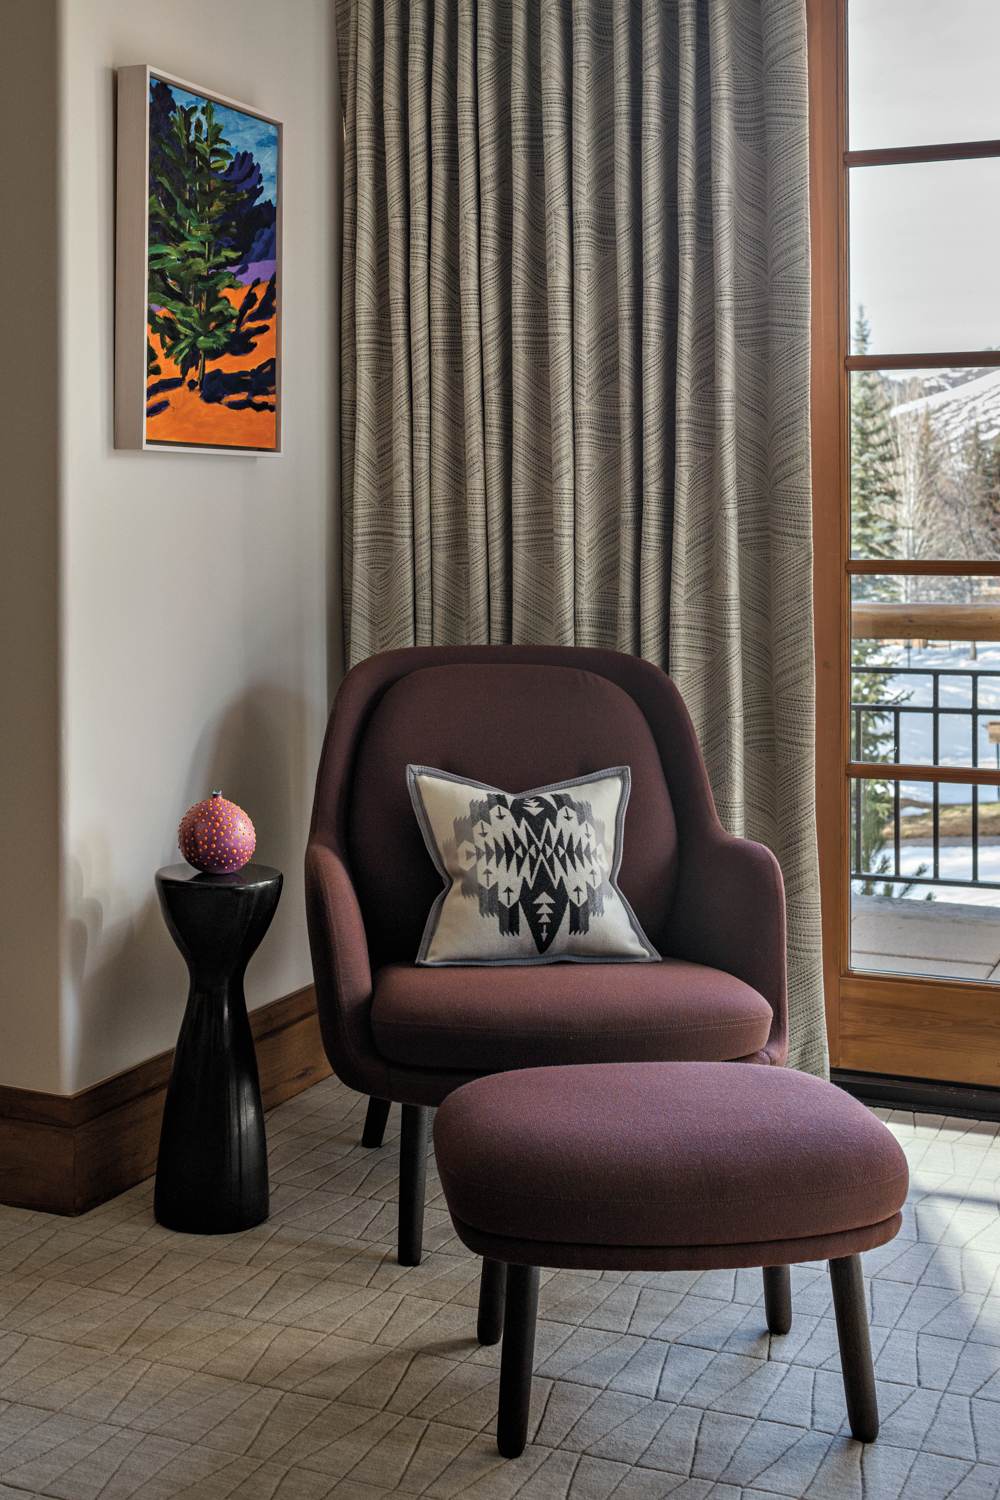 A plum colored armchair and...